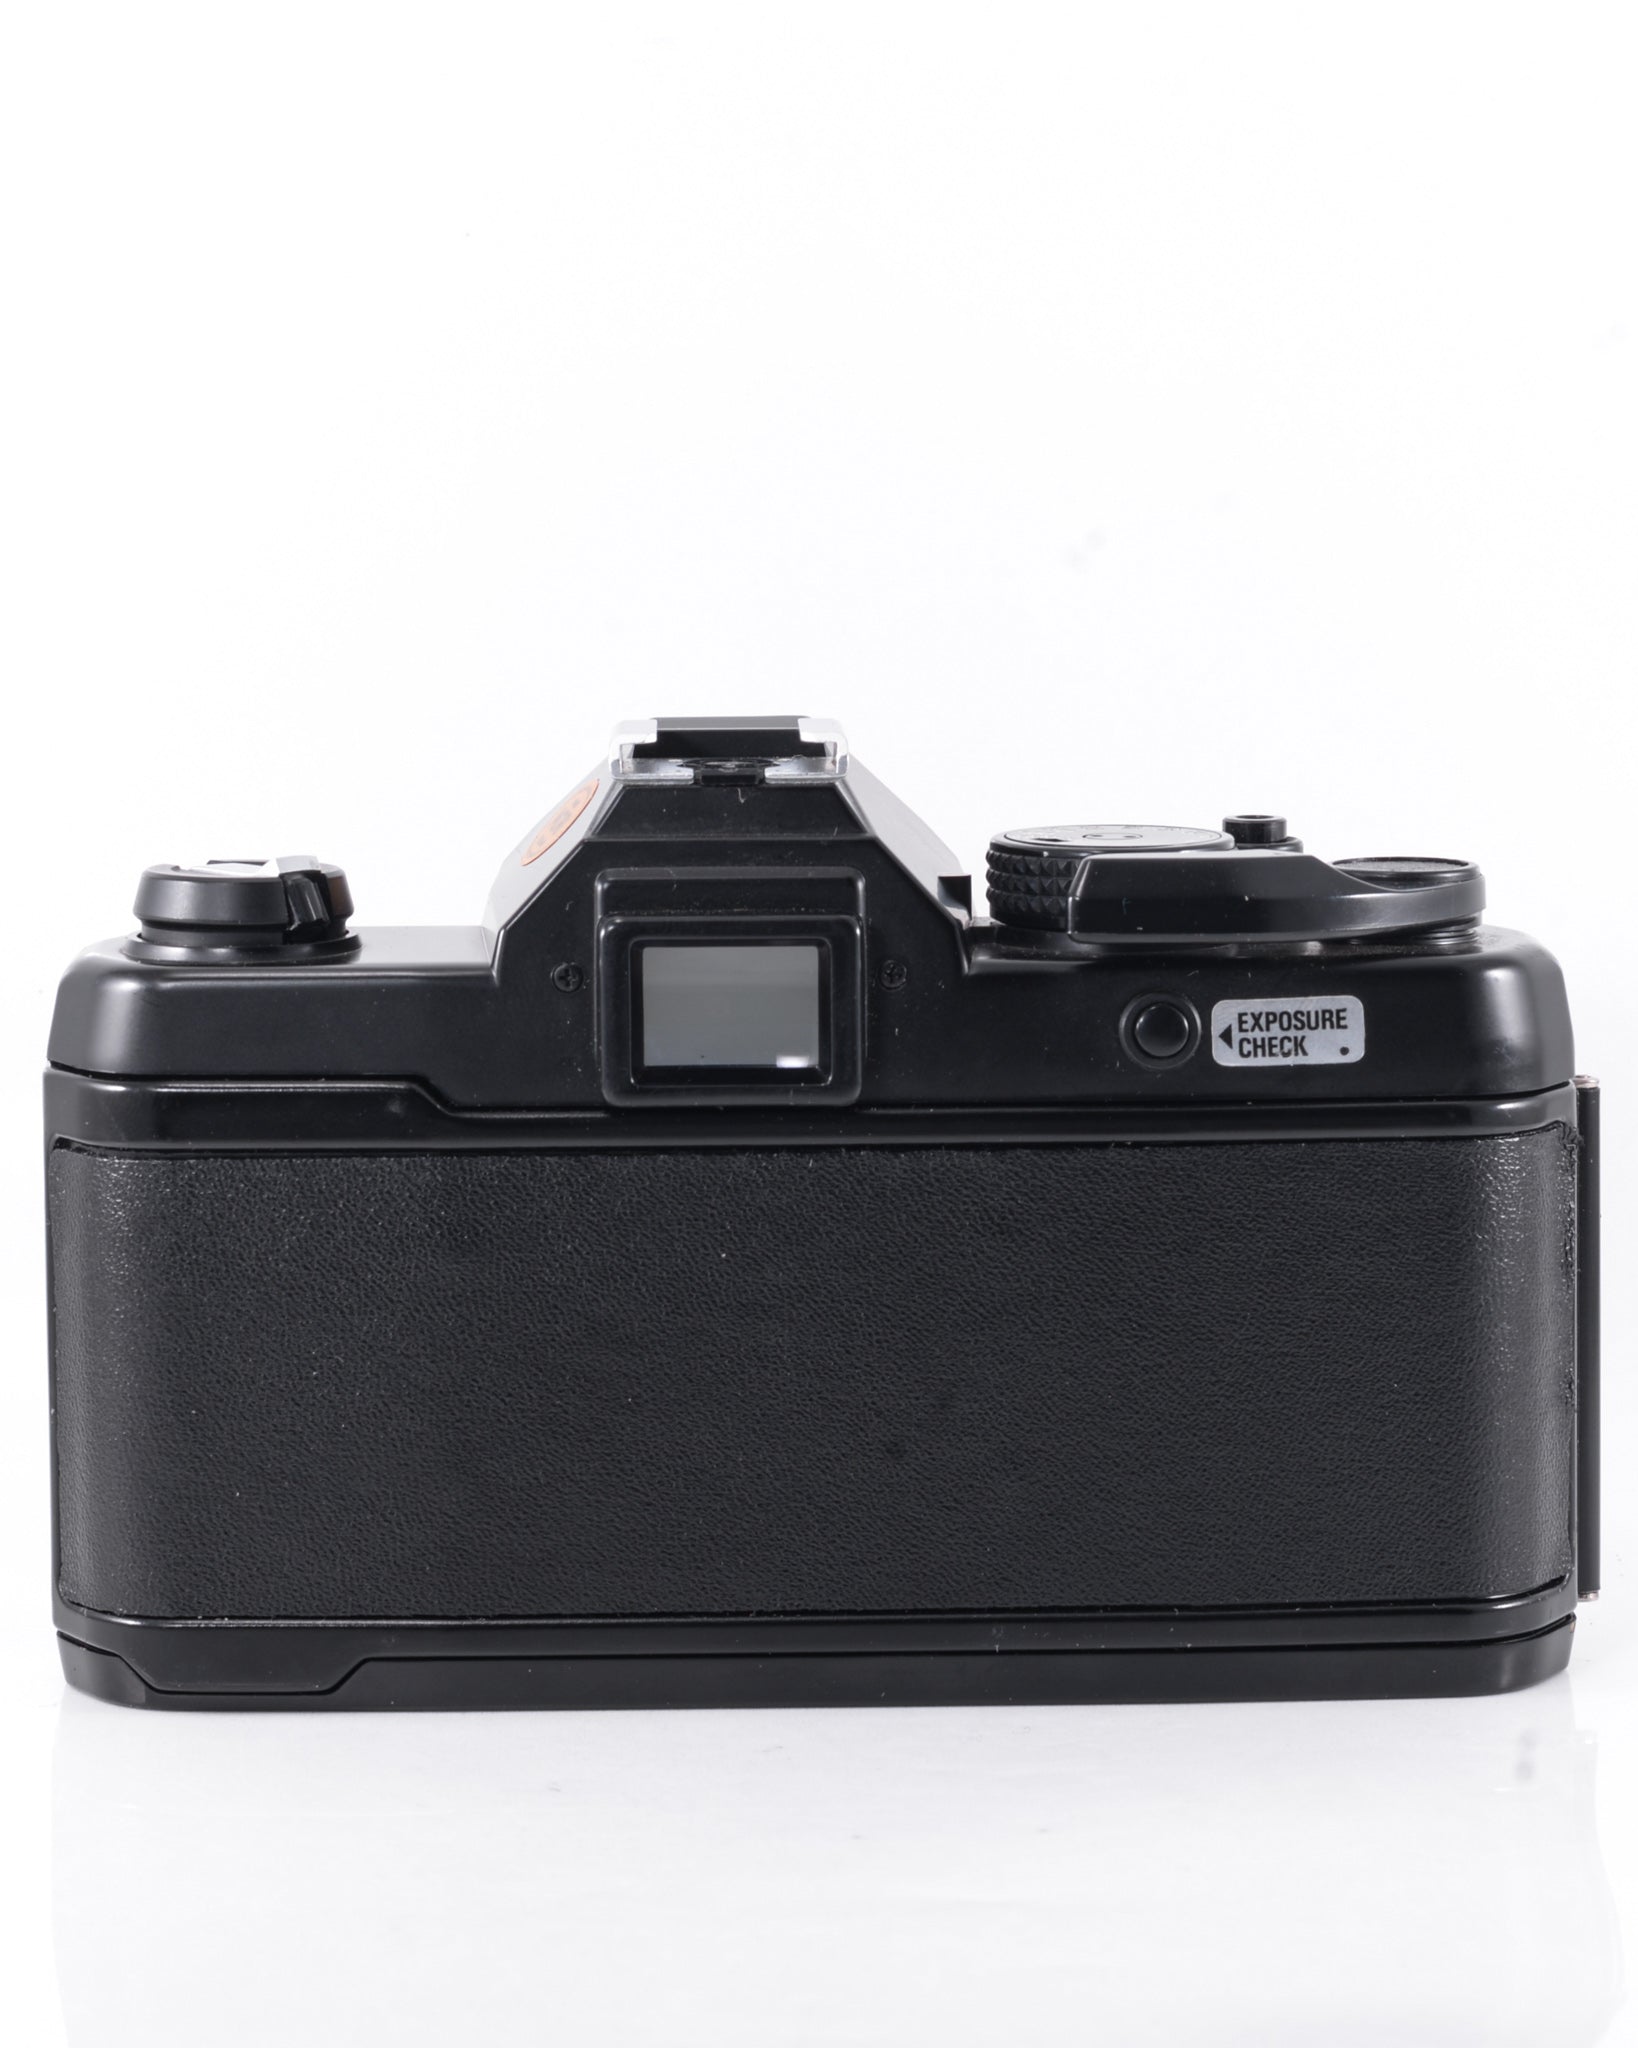 Yashica FX-3 35mm SLR film camera with 55mm f2 lens